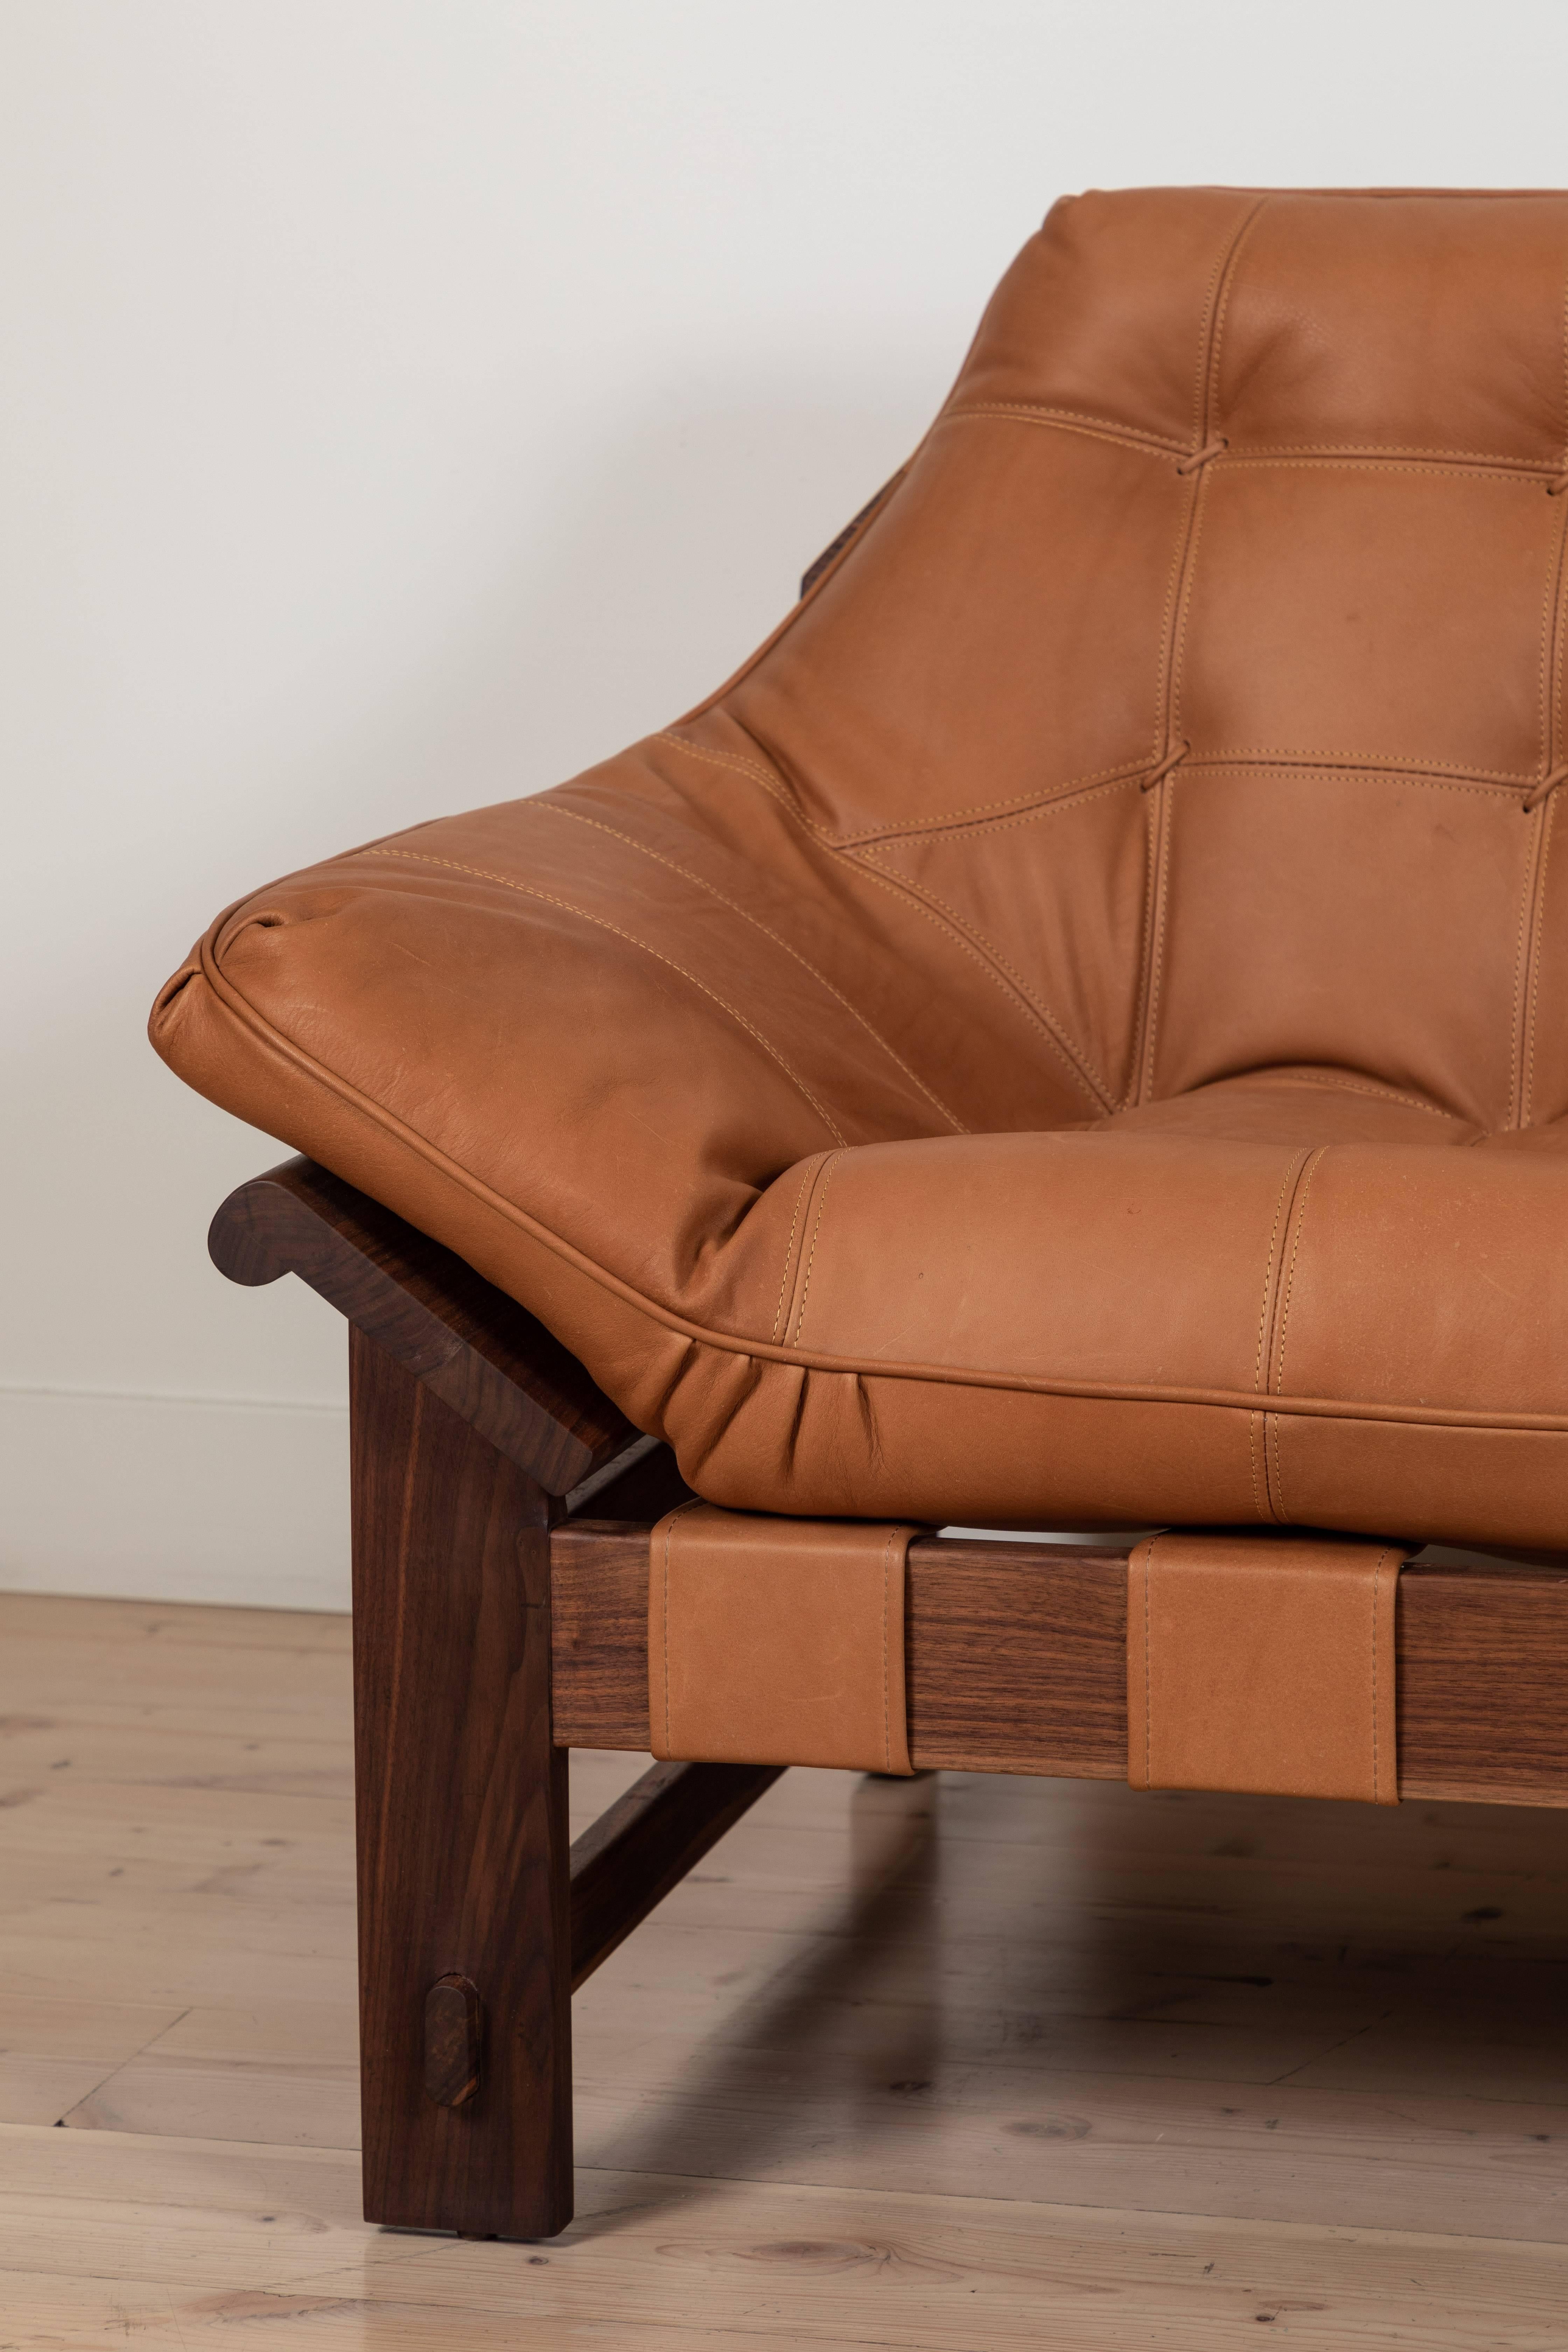 The Ojai sofa features a solid white oak or solid walnut base and a single tufted leather cushion with leather straps.